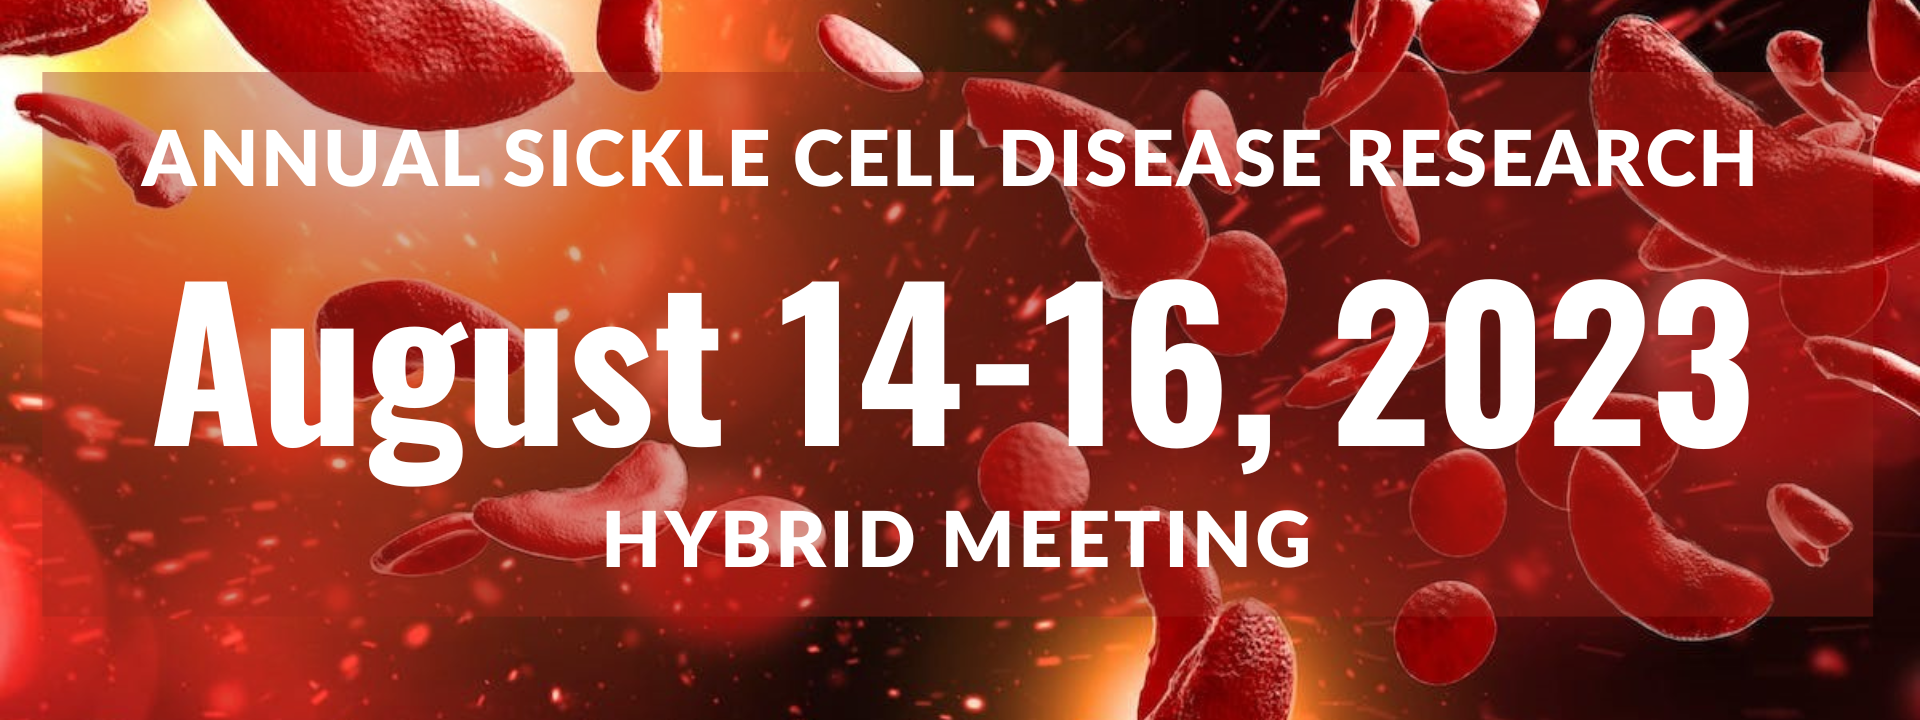 NHLBI Annual Sickle Cell Disease Research Meeting 